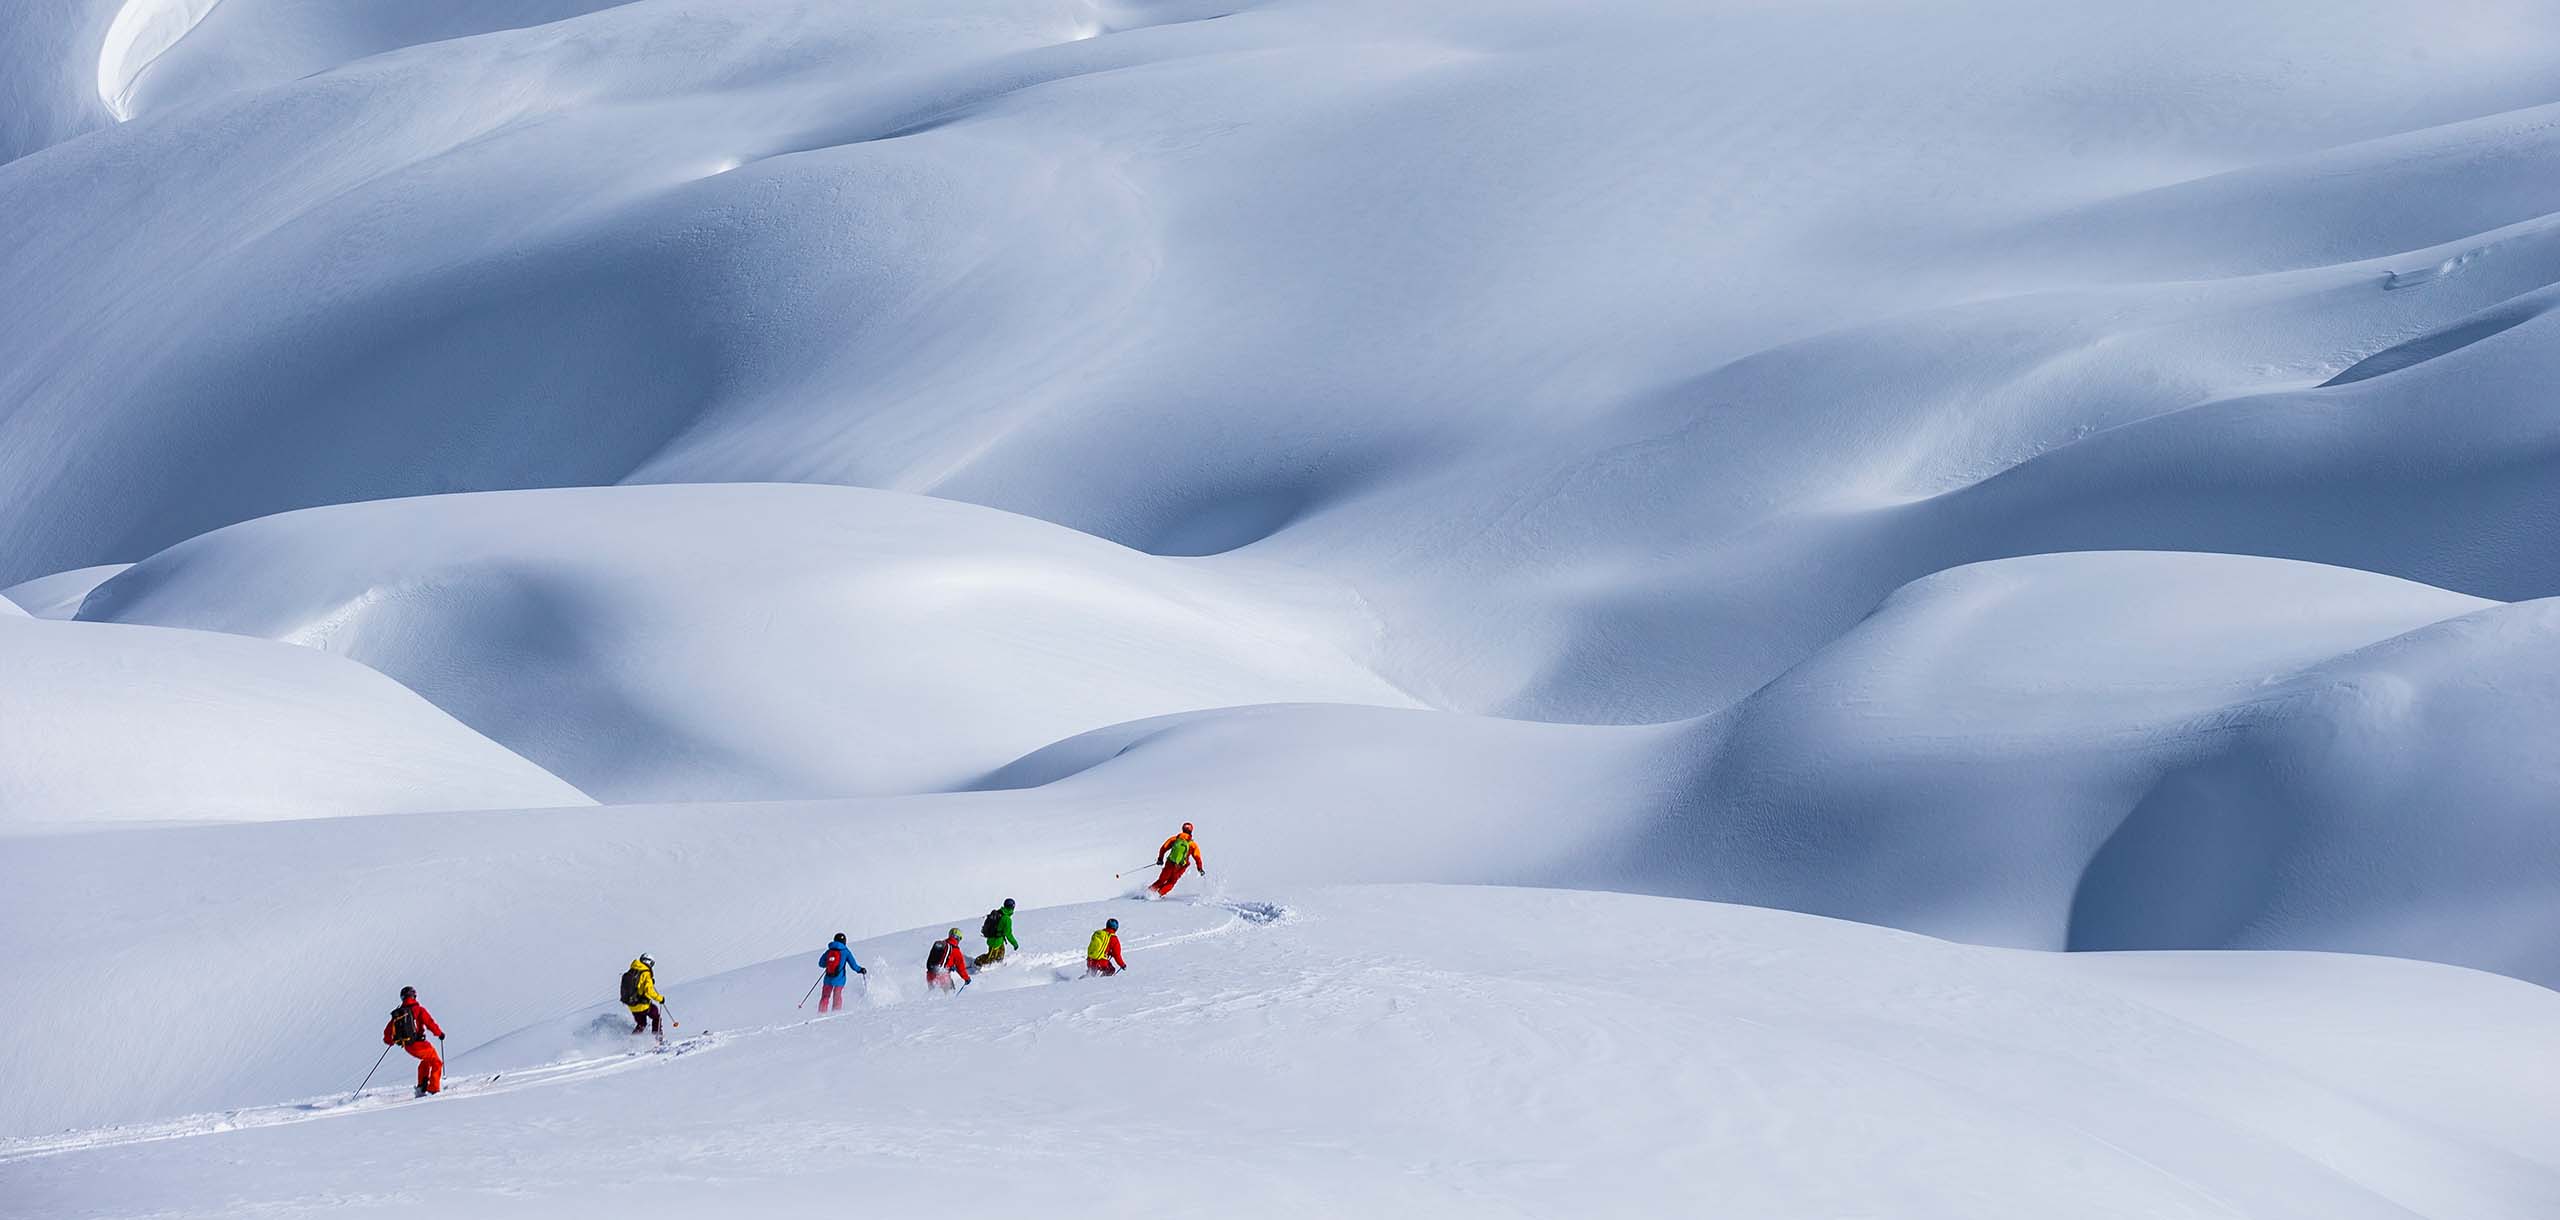 A group of heli-skiiers make their way down the mountainside